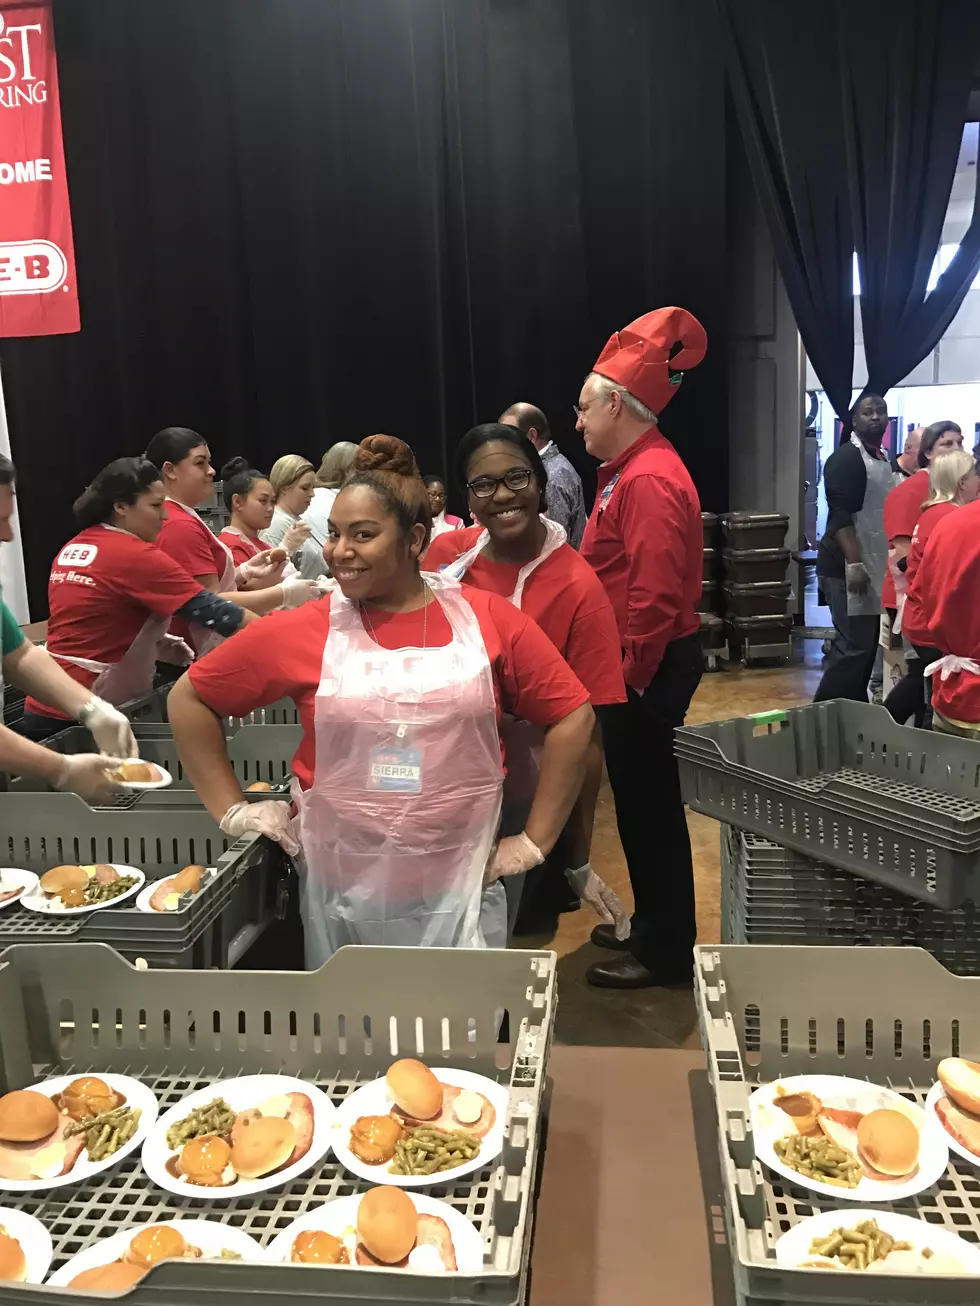 HEB Gives Their 17th Annual Feast Of Sharing Event In Temple